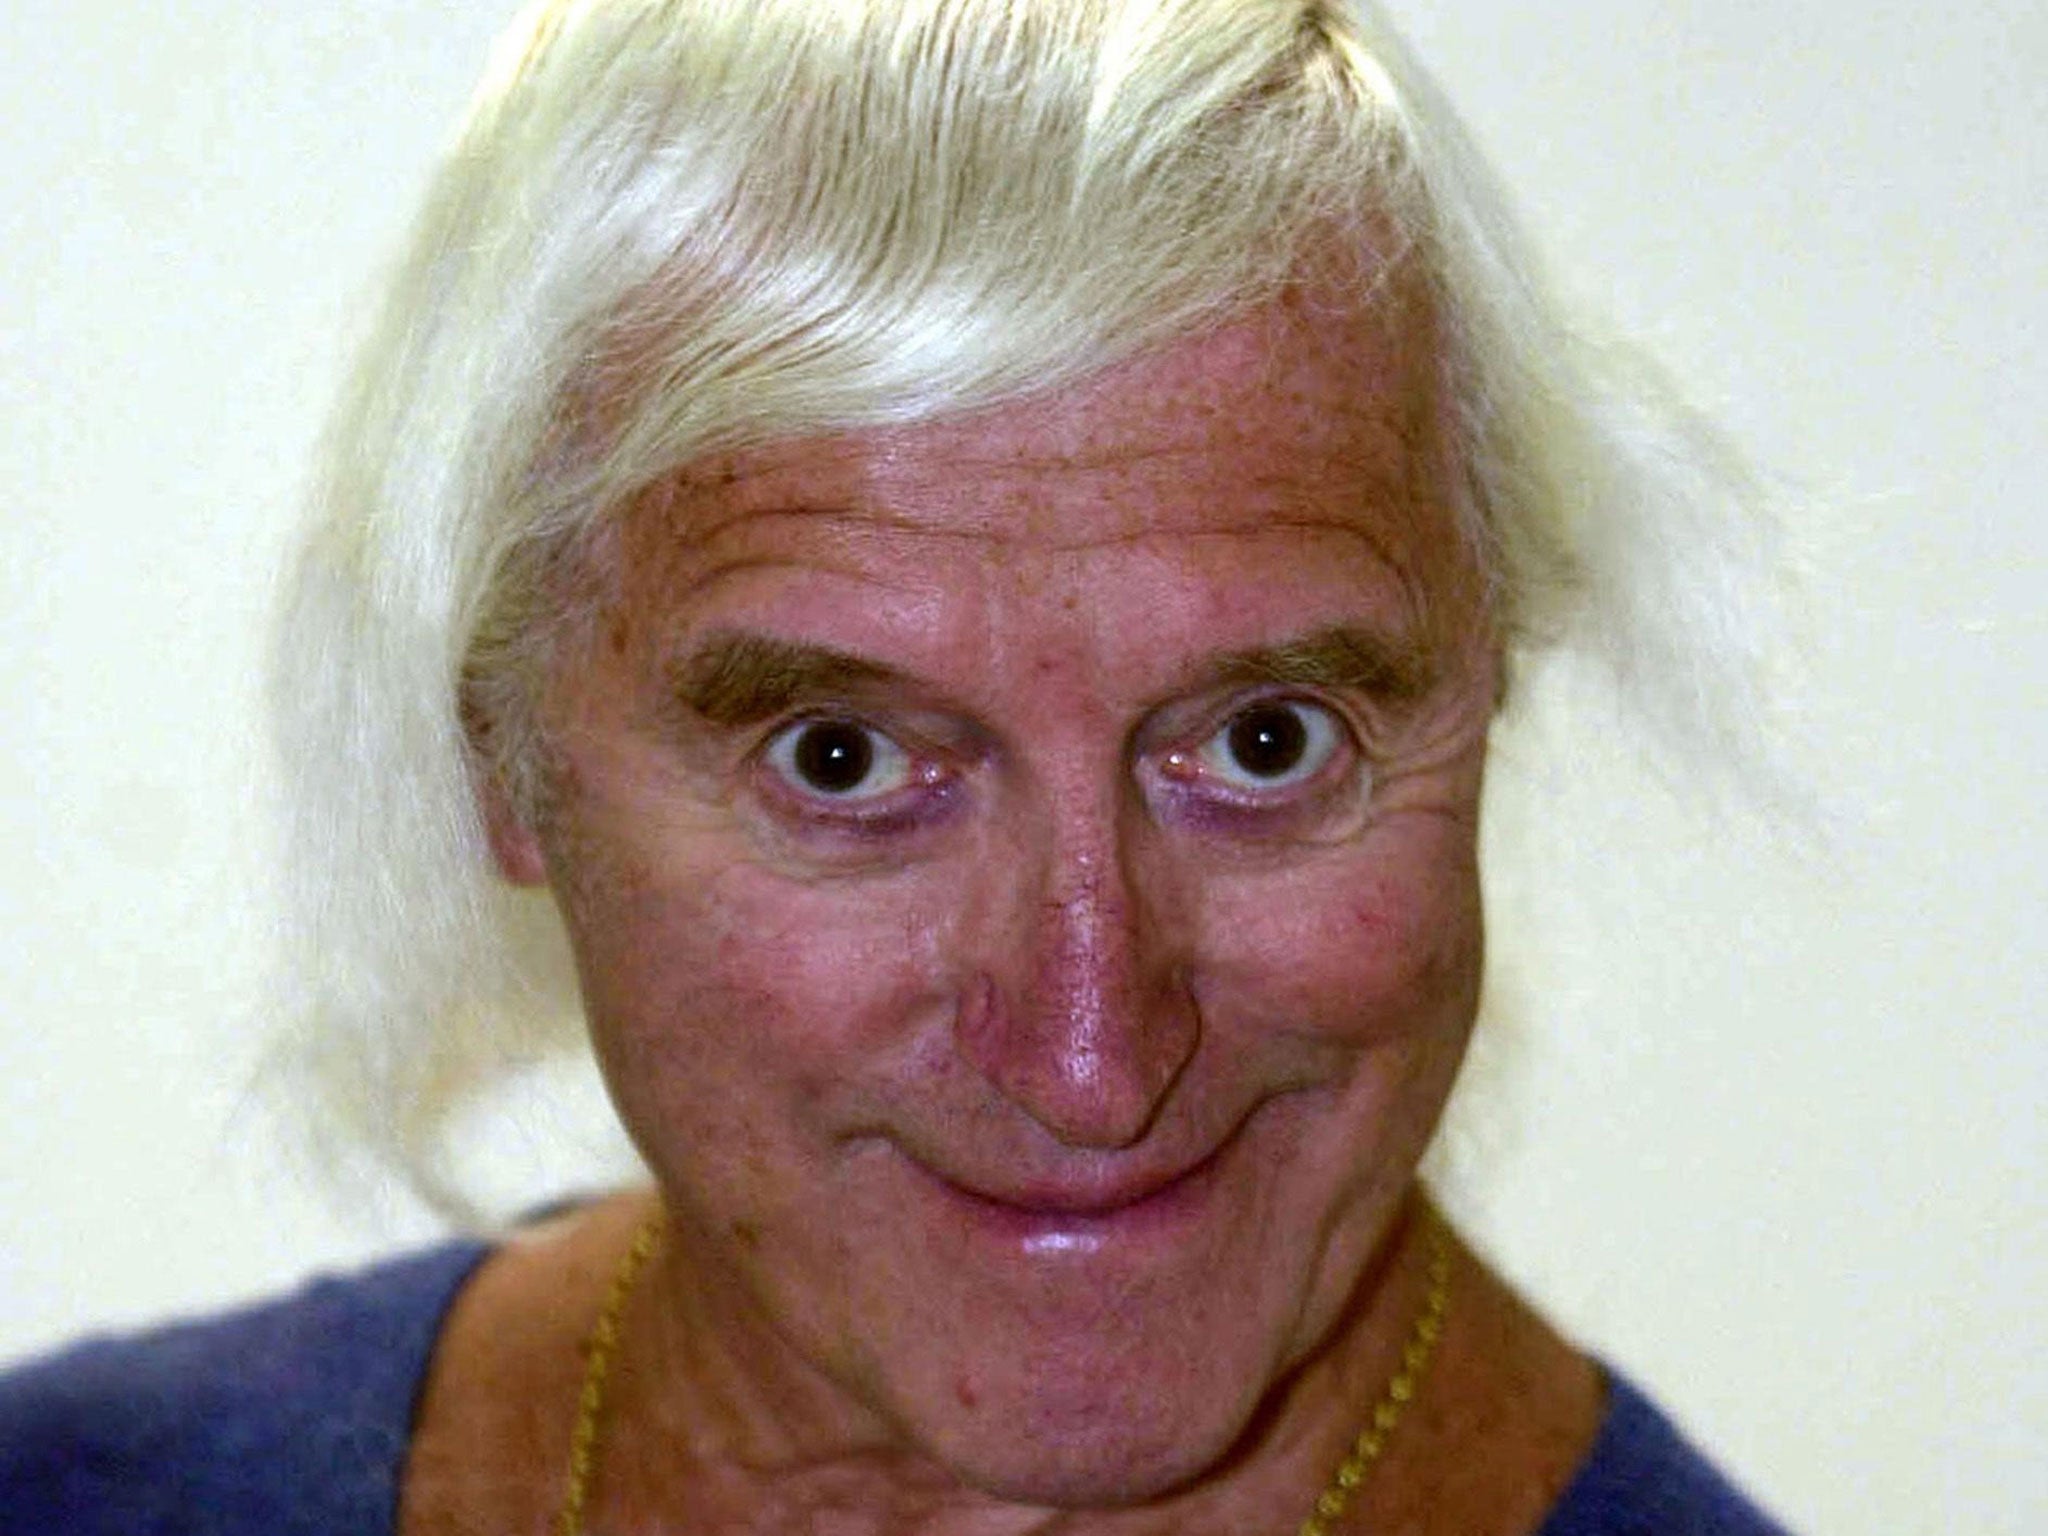 In March 2008, Sussex Police received a complaint that Savile had sexually assaulted a woman in her early 20s in a caravan in Sussex in about 1970.